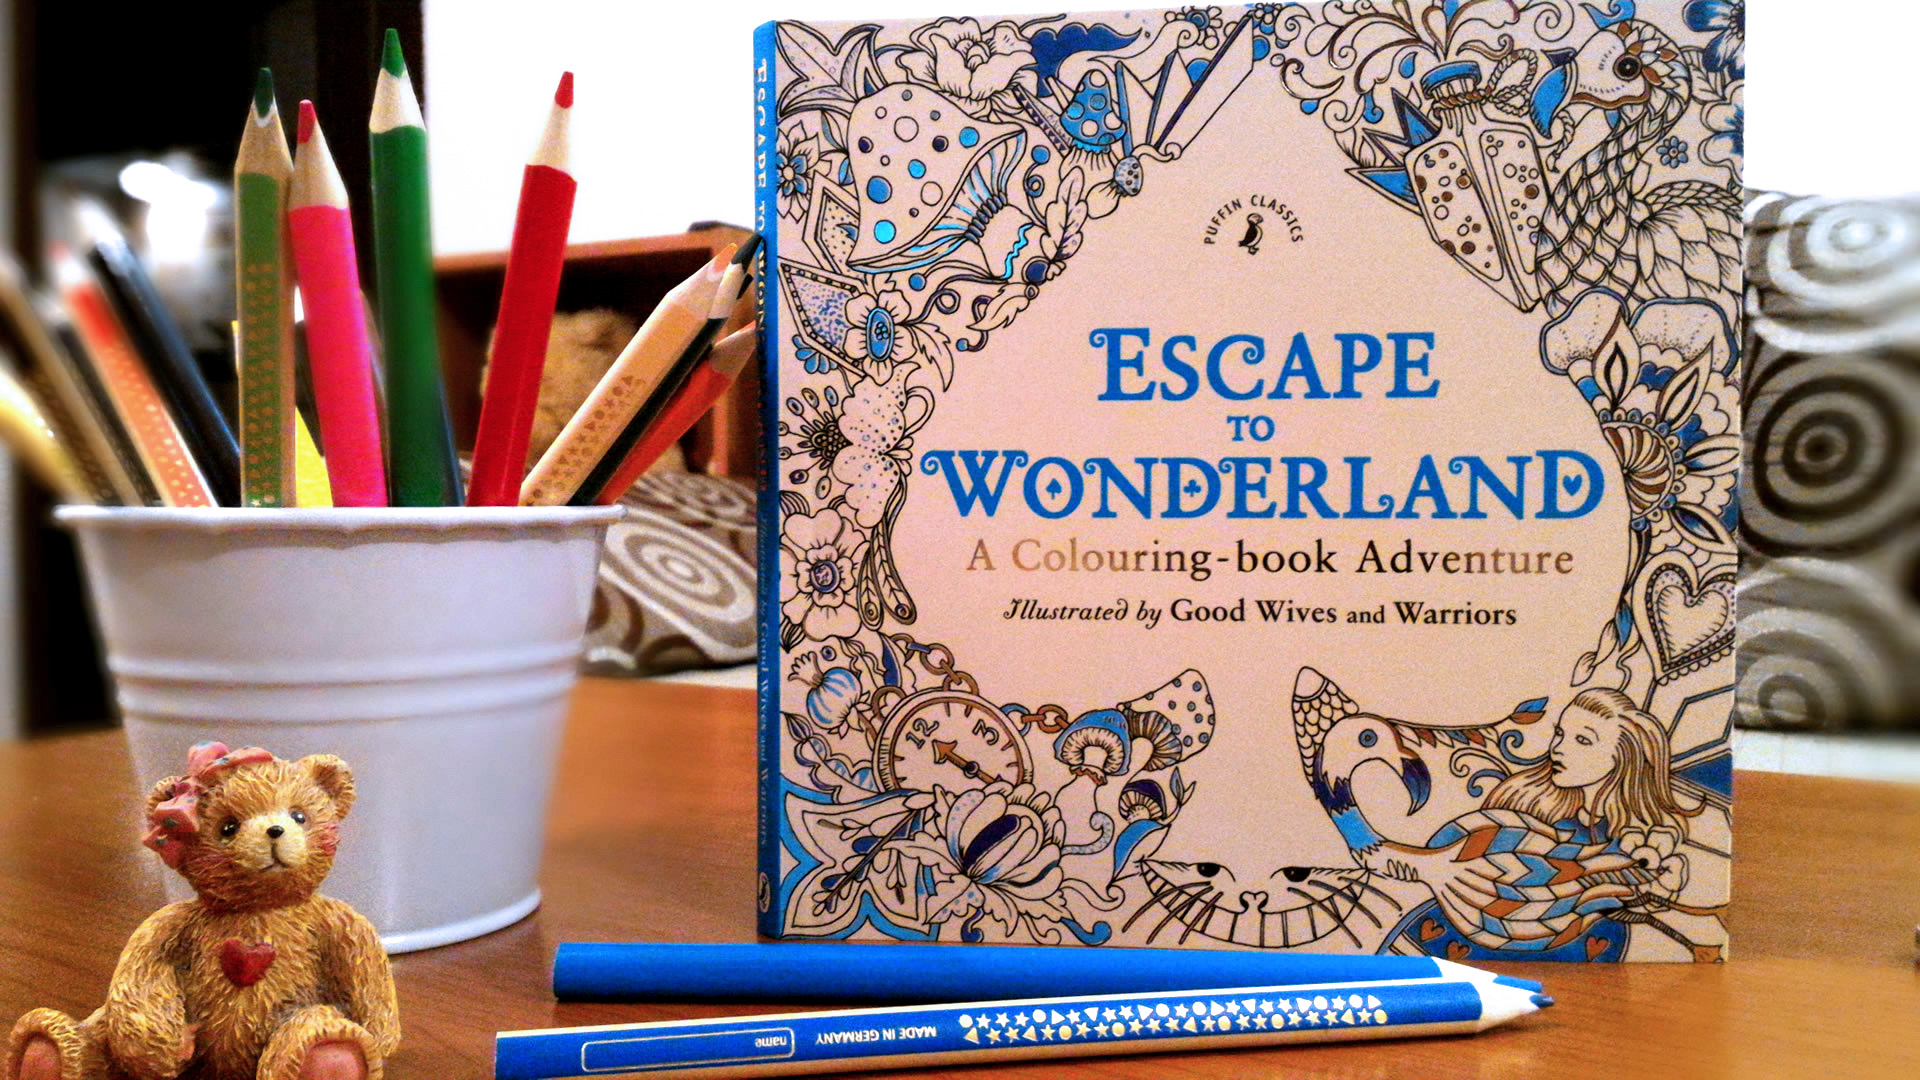 Escape to Wonderland - A Colouring-book Adventure - Good Wives and Warriors - Puffin - ISBN: 9780141366159